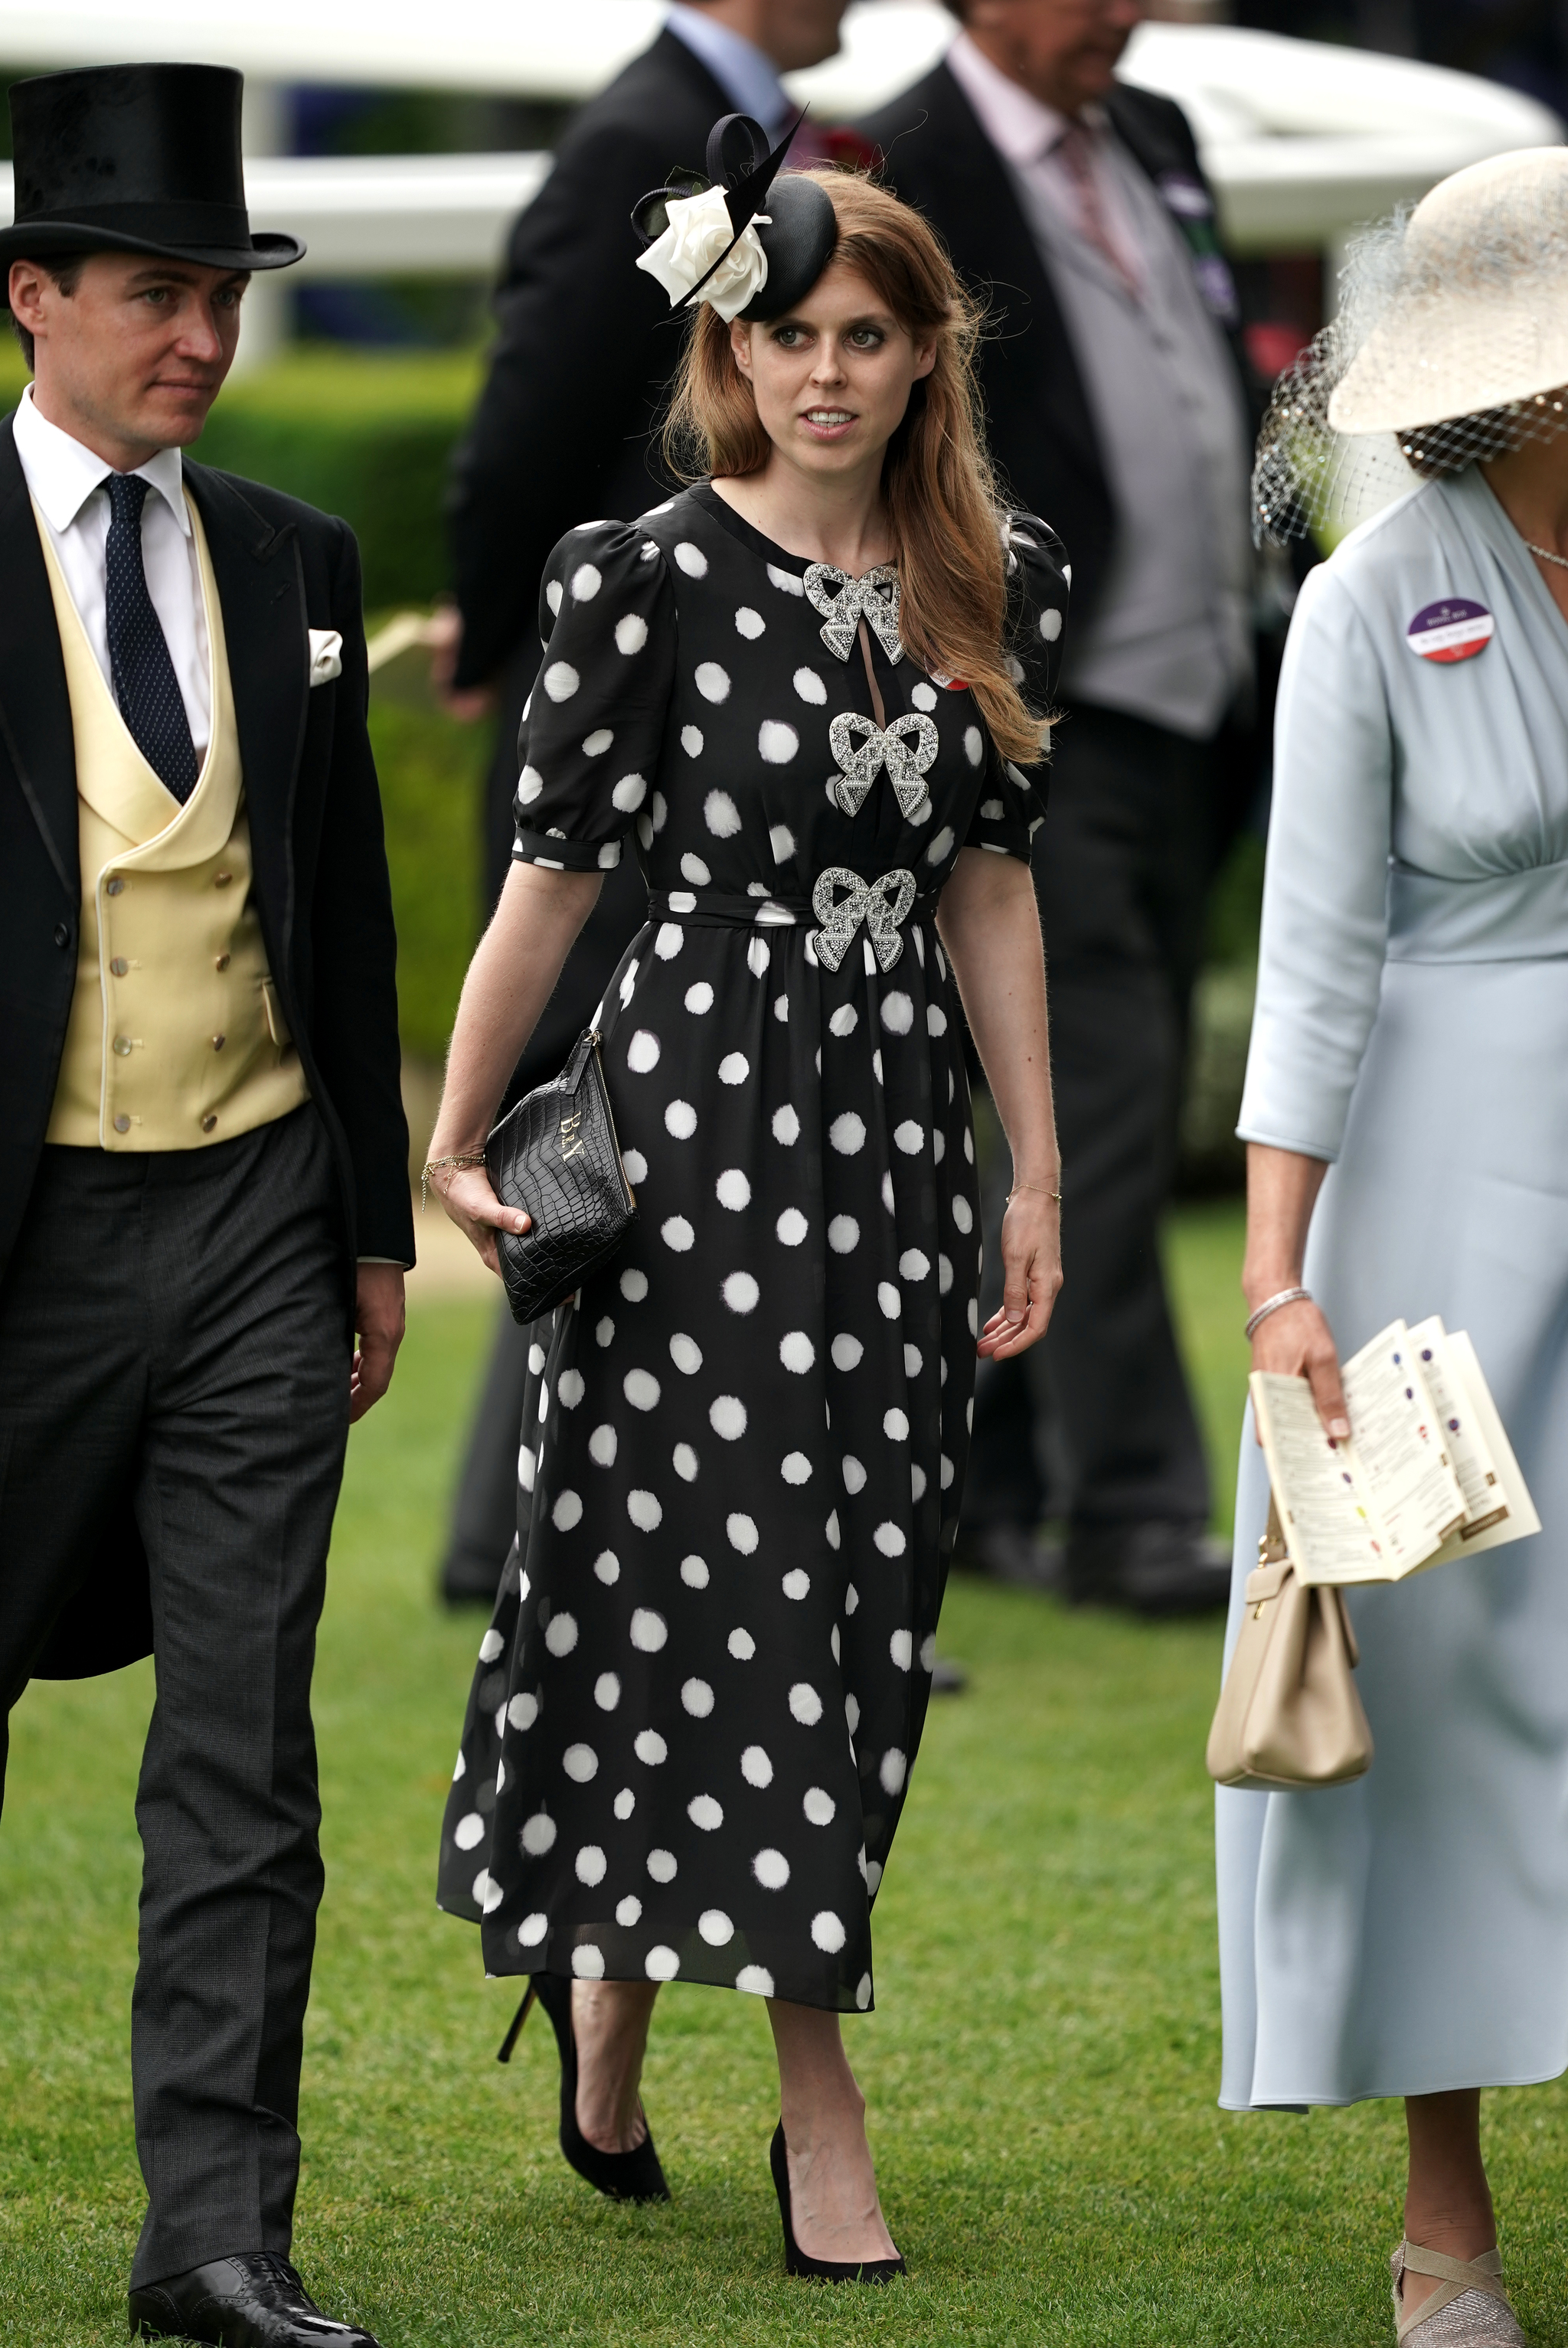 Beatrice of York at Ascot in a polka dot dress.